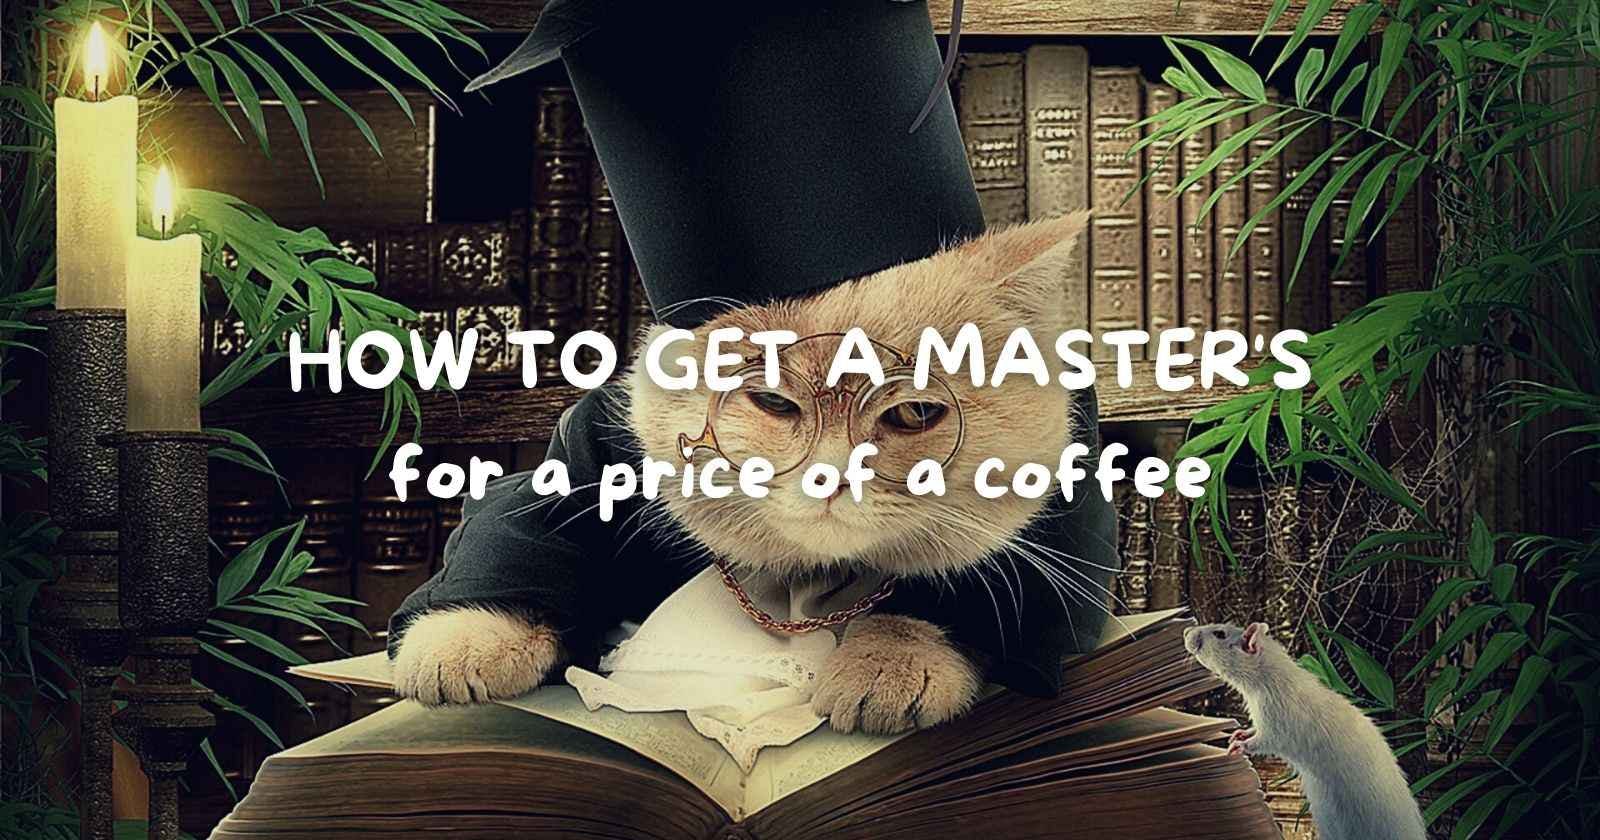 How to get an online Master's in CS for a price of your morning latte